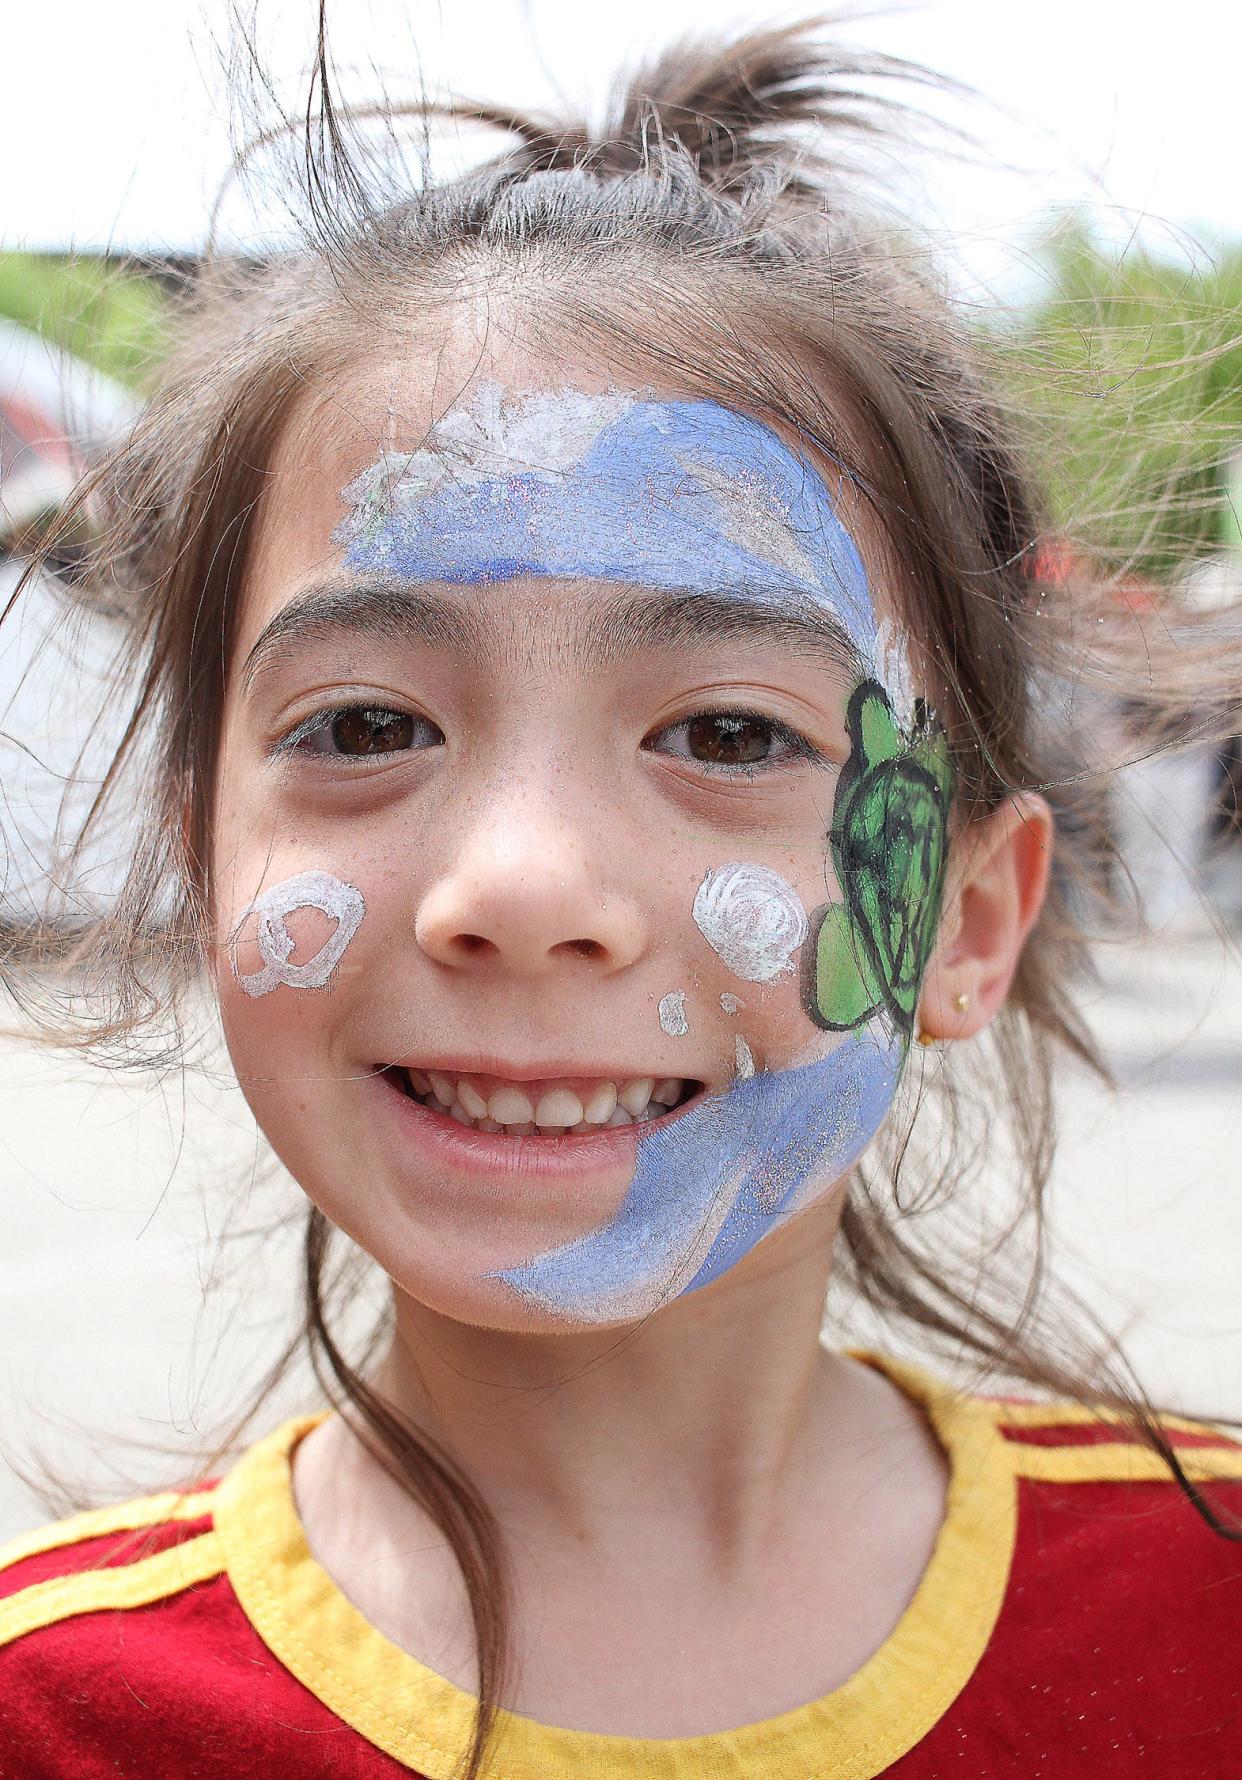 Naomi shows off her painted face at Gallatin's Squarefest on Saturday, April 30, 2022.